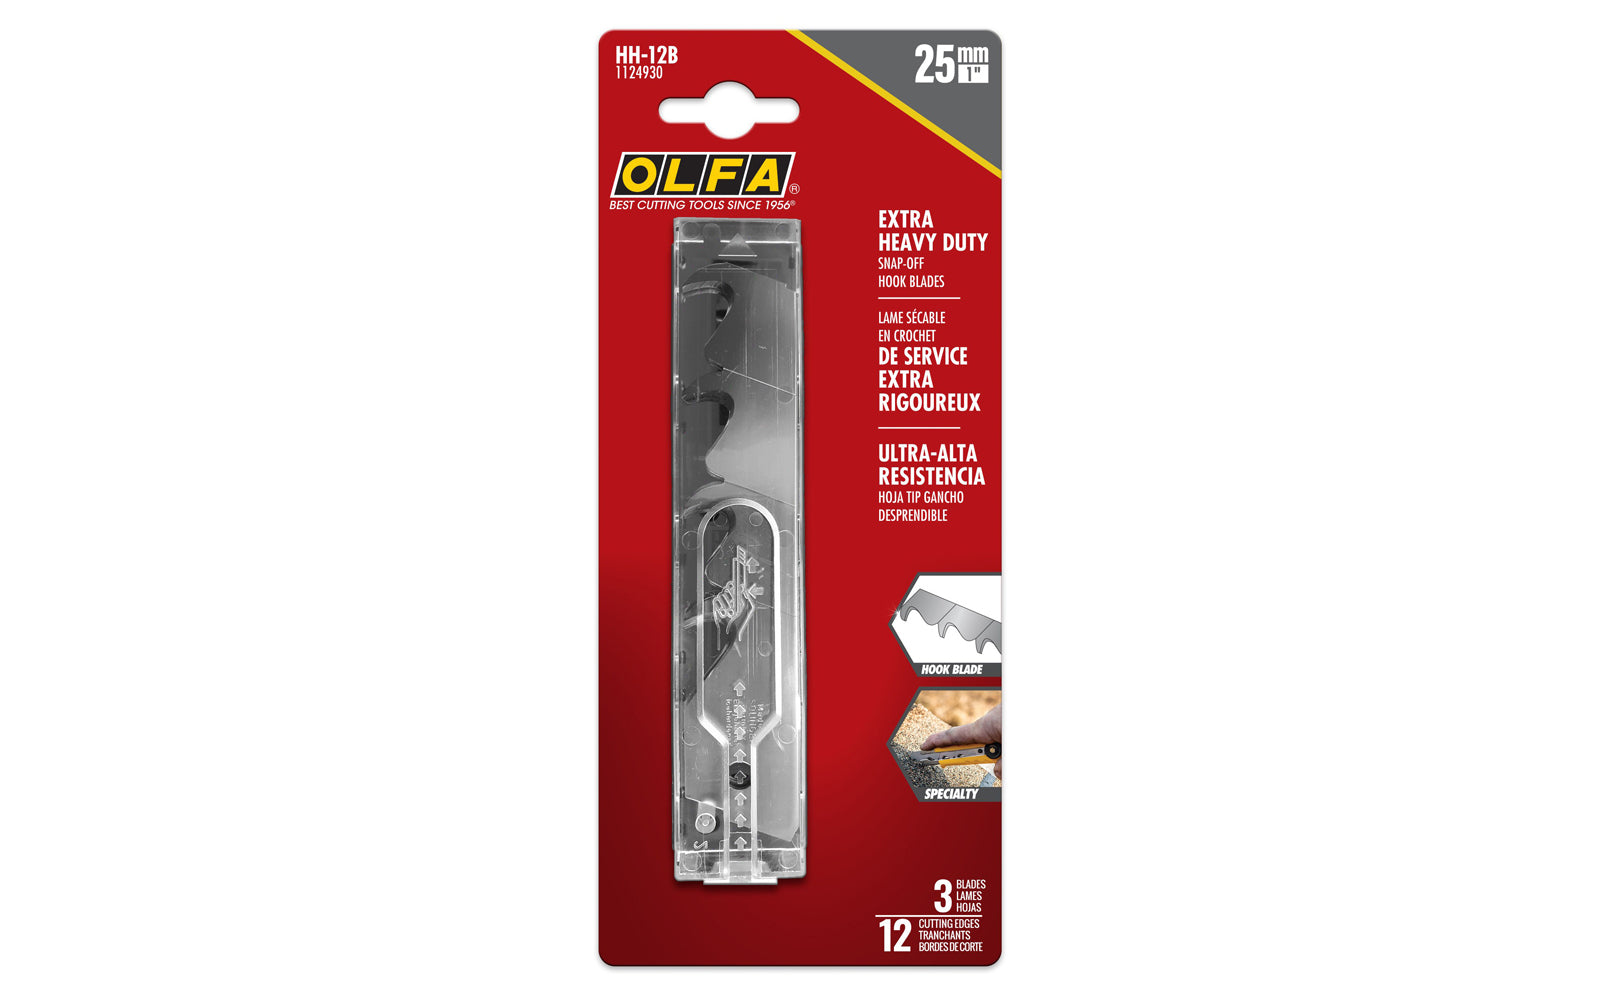 Olfa "HH-12B" 25 mm Hook Replacement Blades are designed with high-quality carbon tool steel for an ultra-sharp edge, & the 25mm blades are shaped to pull material toward the blade while keeping the sharp edge away. Hook shape protects surface under cut - Perfect for carpet, house wrap, shingles, & more. 3 Pack